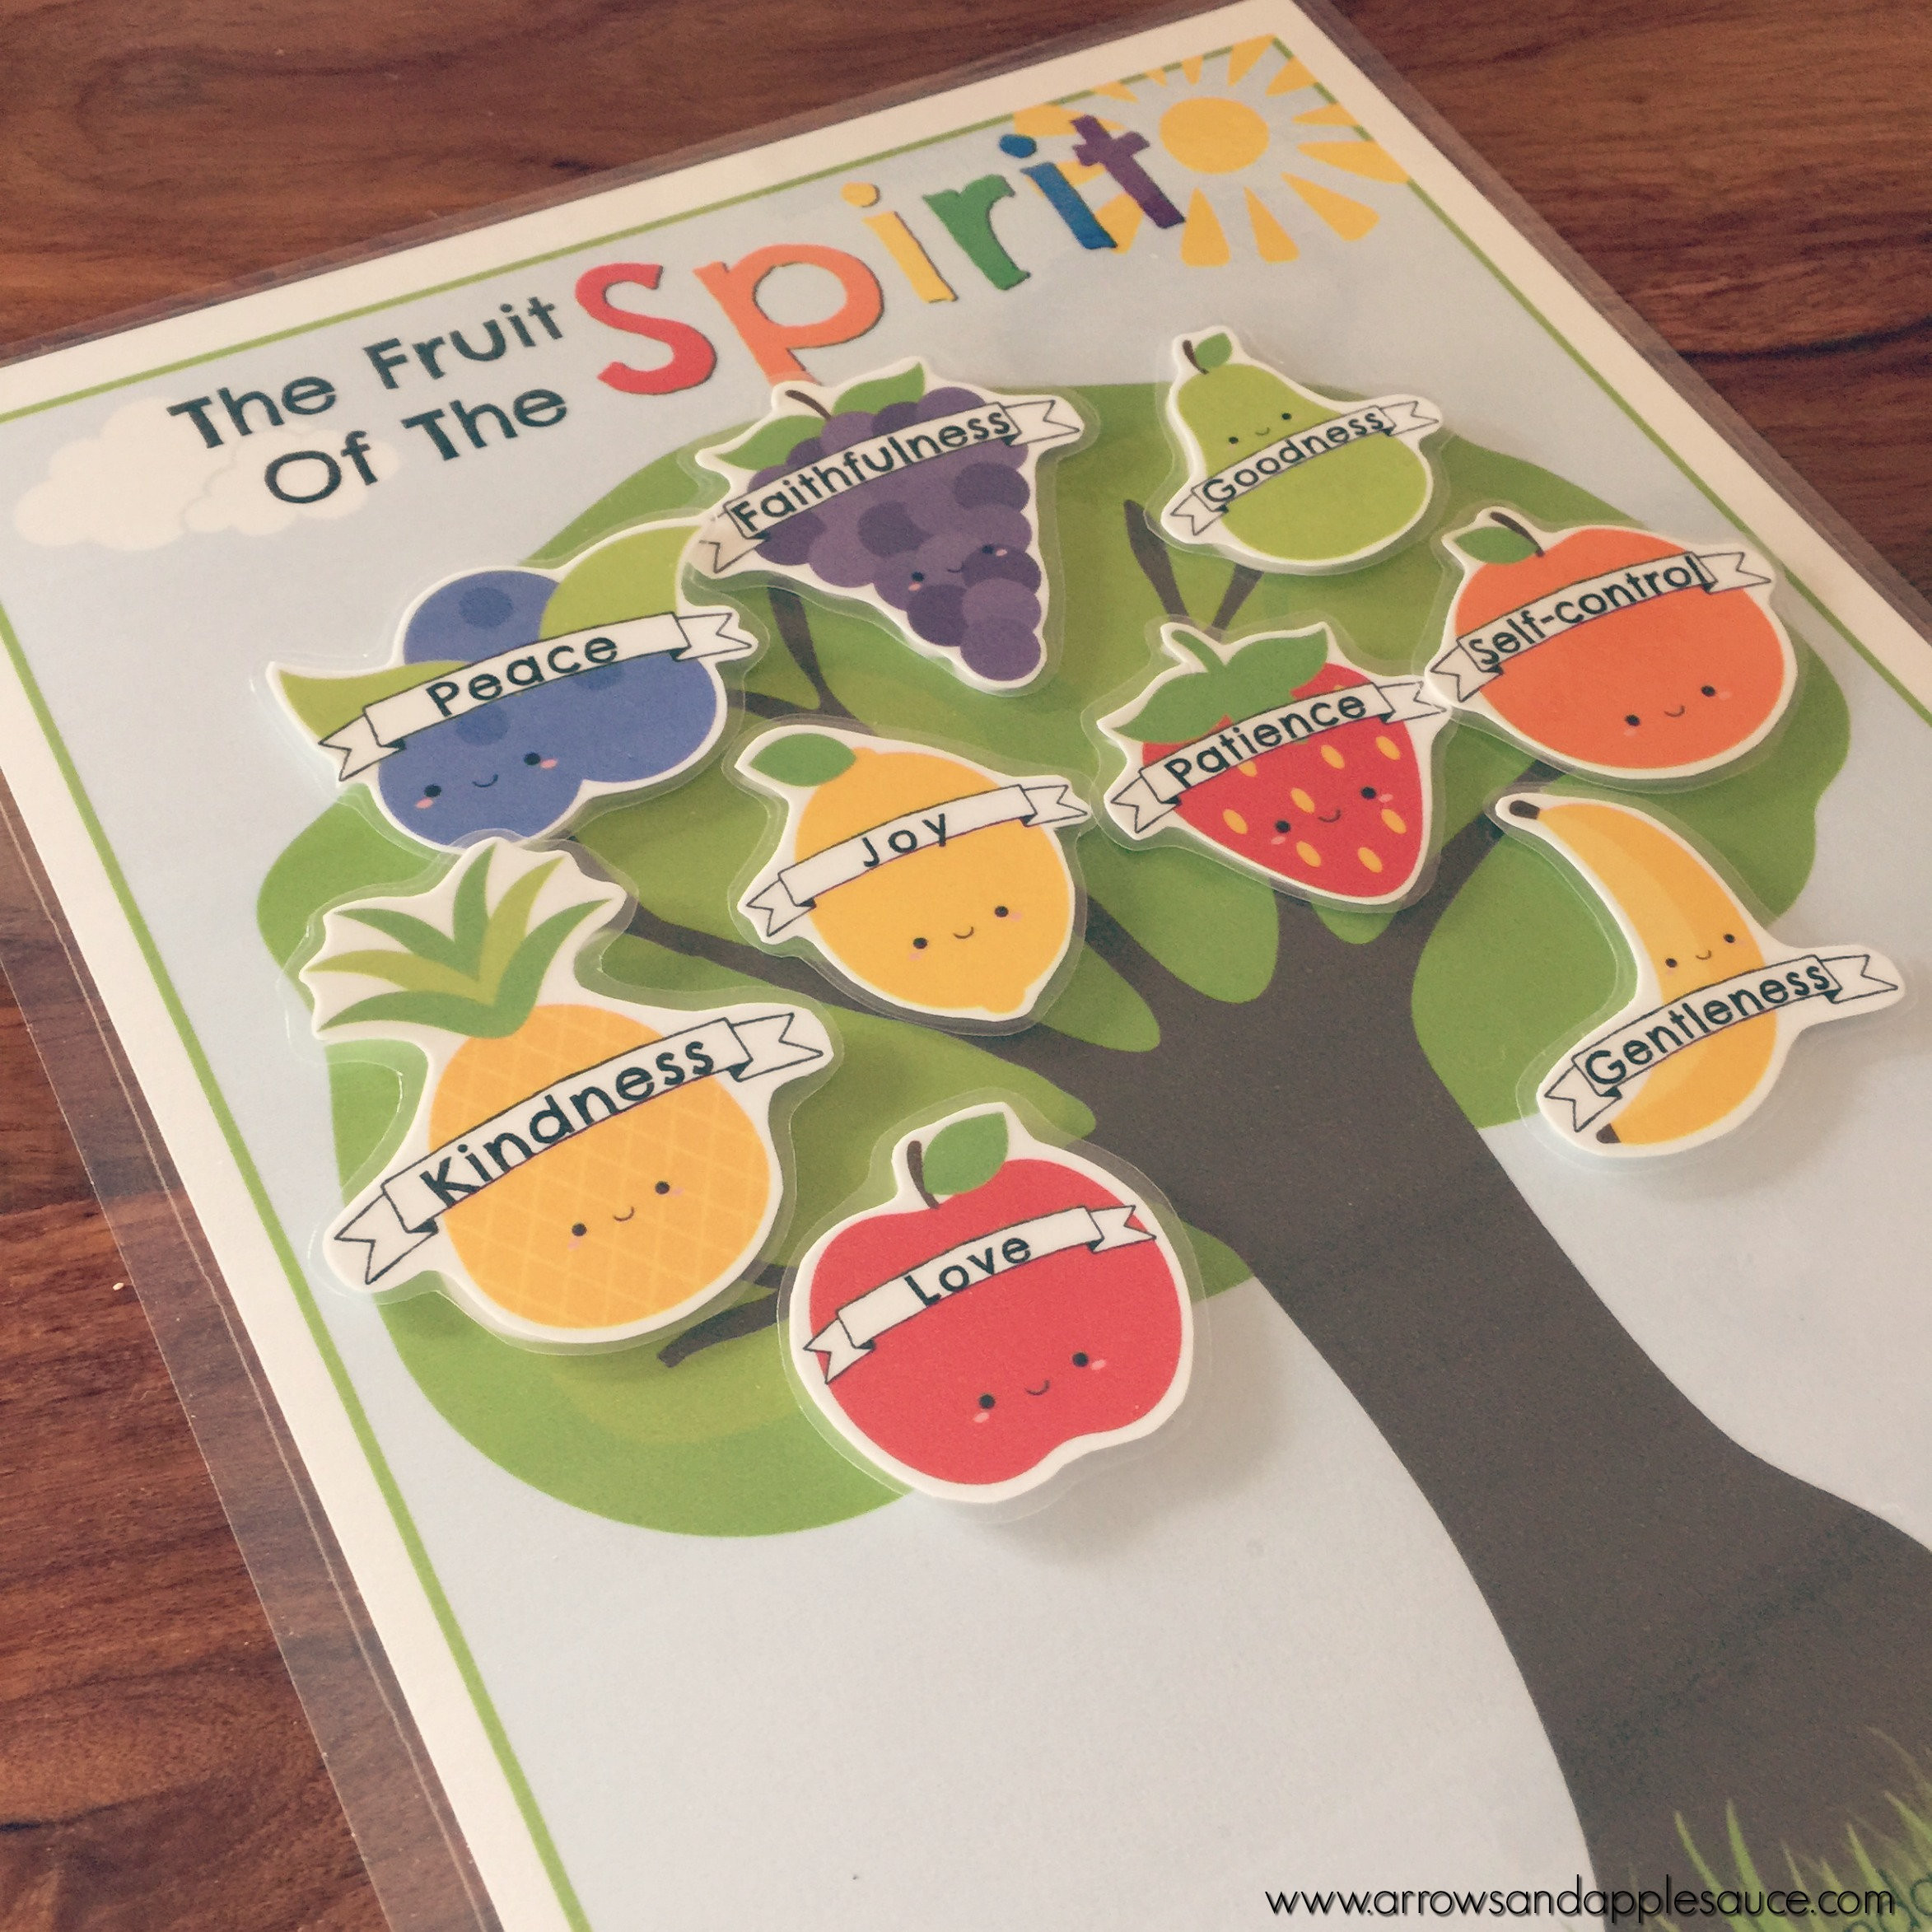 The top 25 Ideas About Fruit Of the Spirit Crafts for Preschoolers